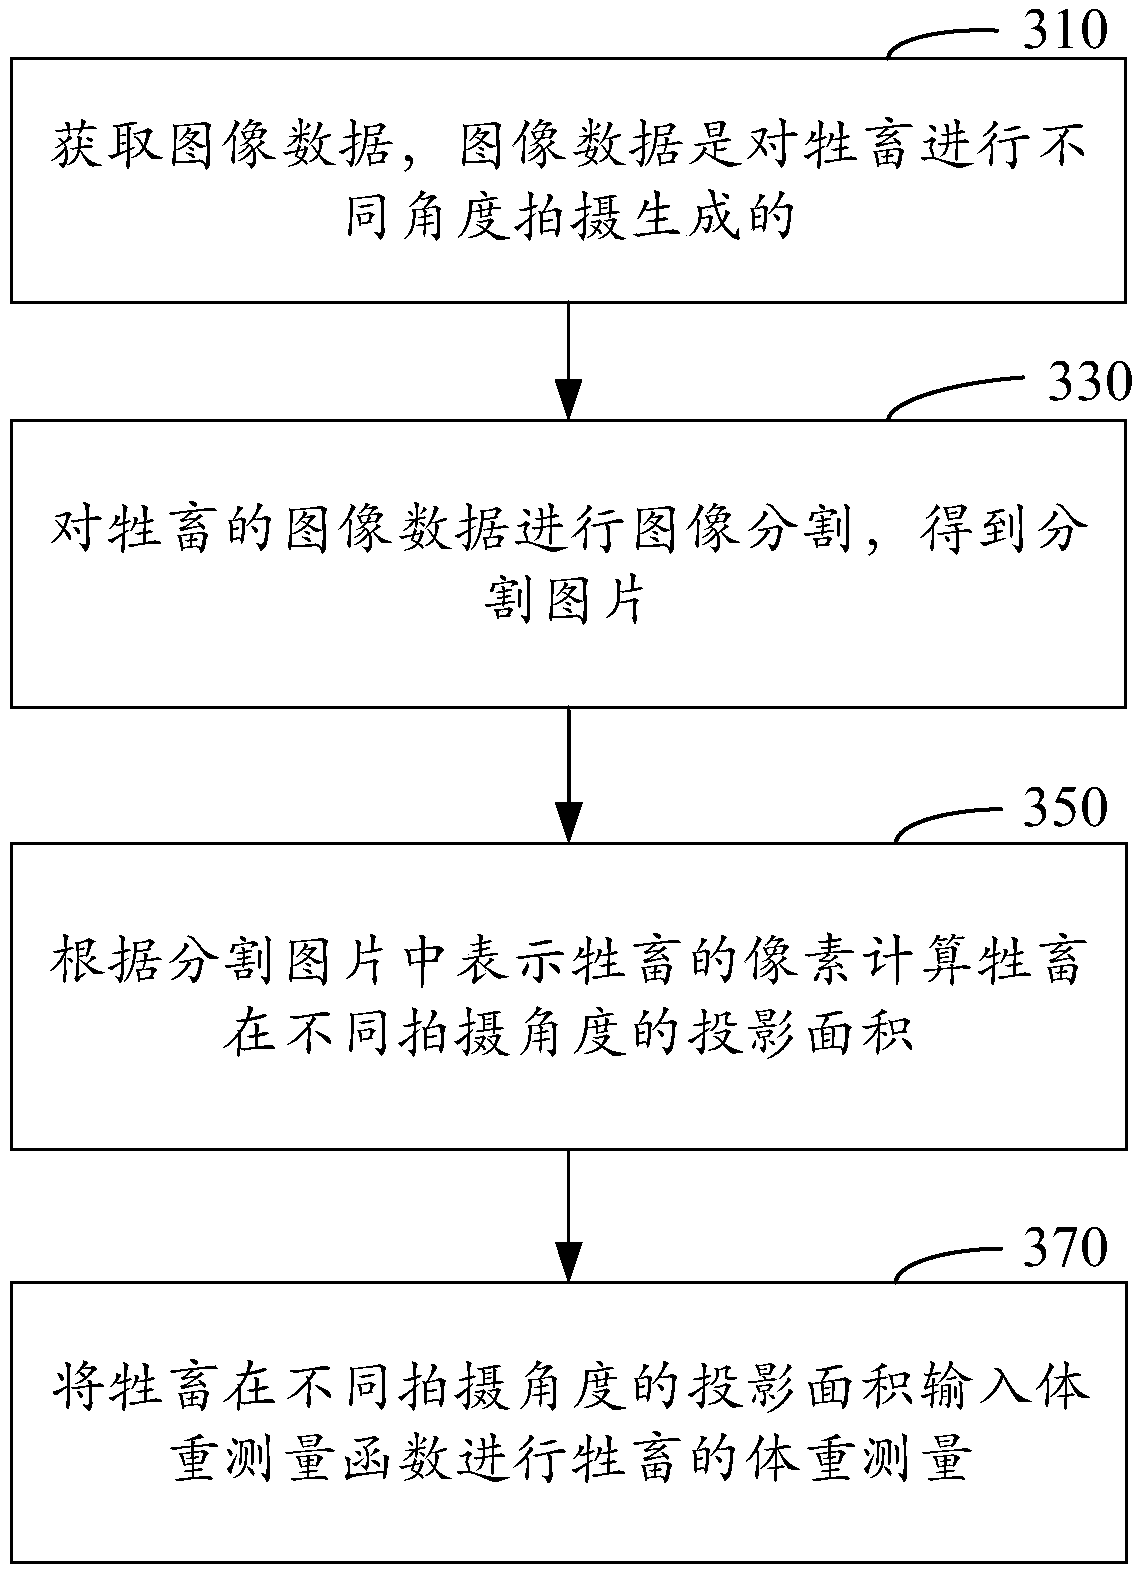 Method and device for measuring weight of livestock